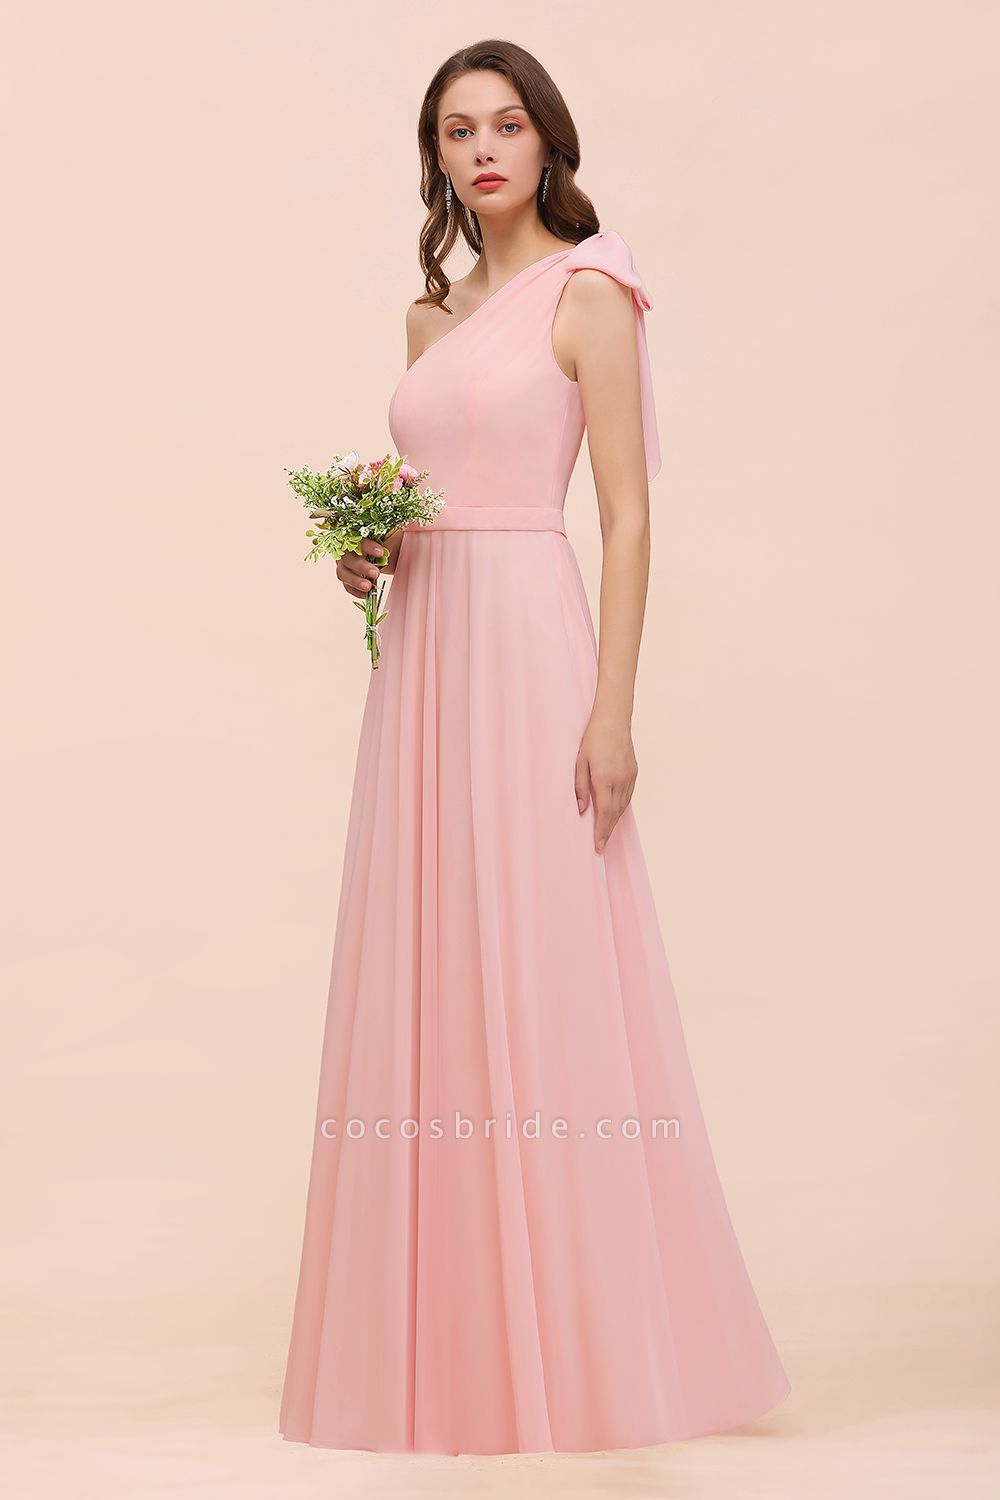 Pink One Shoulder A-Line Soft Chiffon Floor-length Bridesmaid Dress With Bowknot